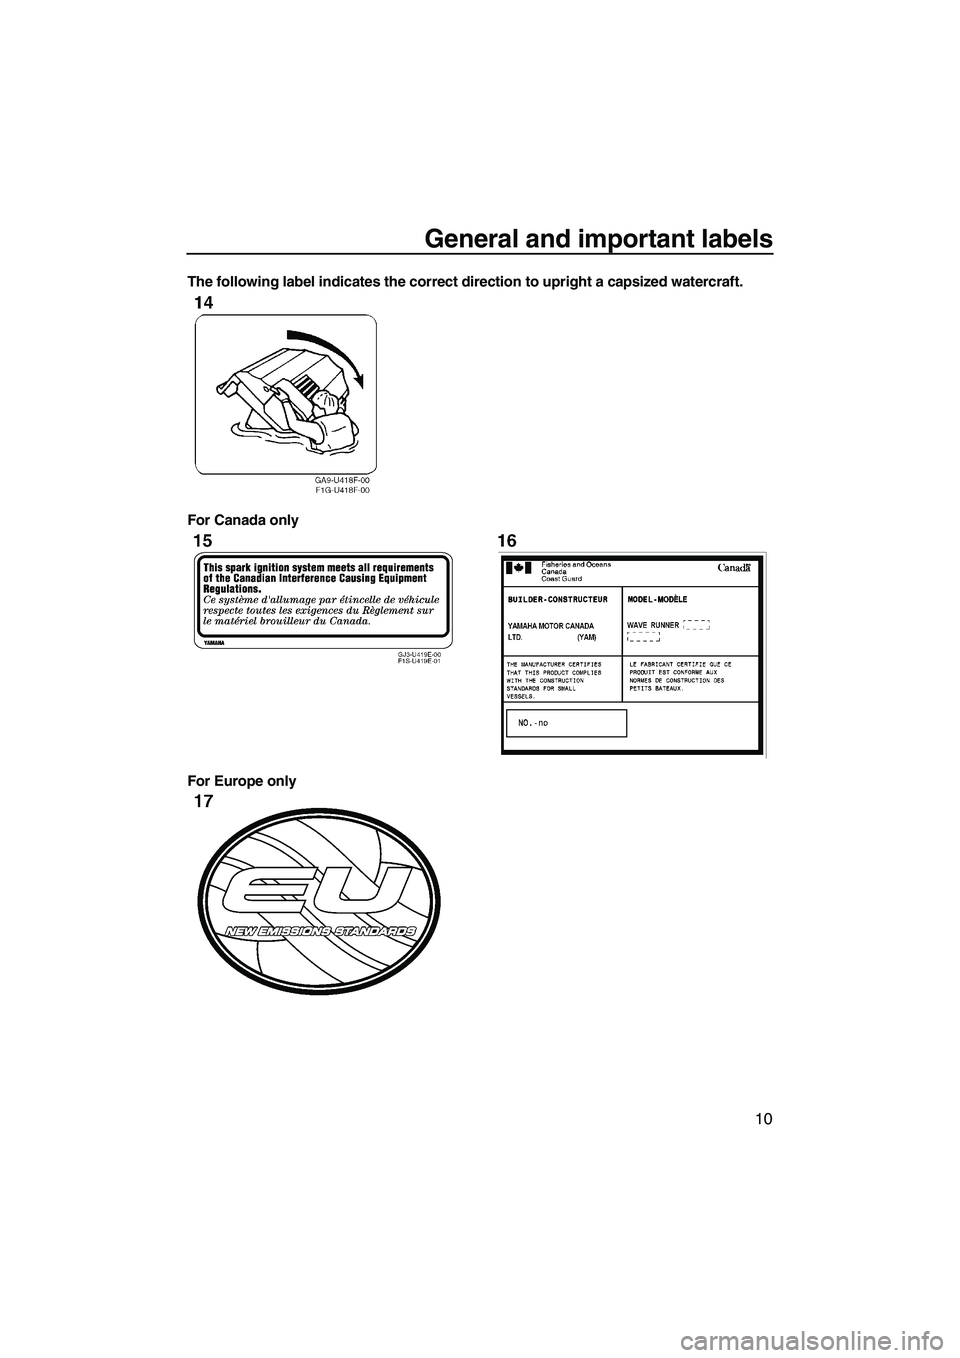 YAMAHA VX SPORT 2007 User Guide General and important labels
10
The following label indicates the correct direction to upright a capsized watercraft.
For Canada only
For Europe only
UF1K72E0.book  Page 10  Wednesday, August 2, 2006 